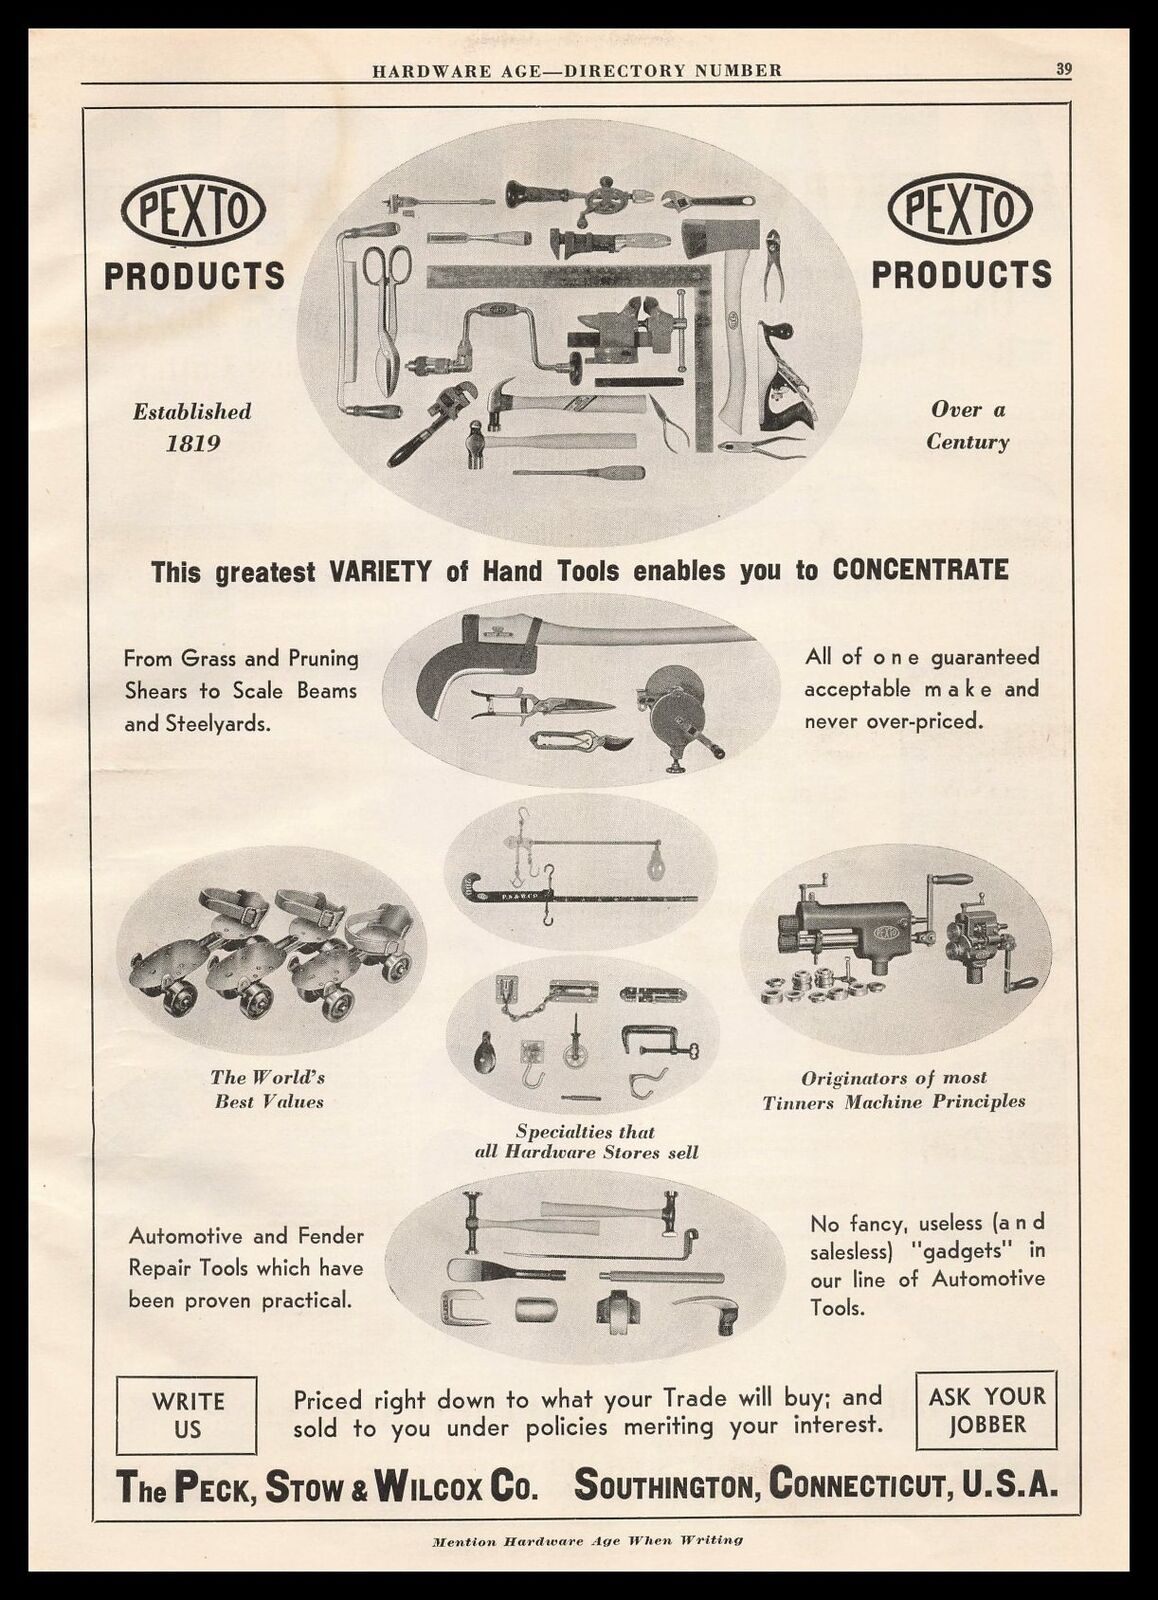 1935 The Peck Stow & Wilcox Co Southington Connecticut PEXTO Hand Tools Print Ad